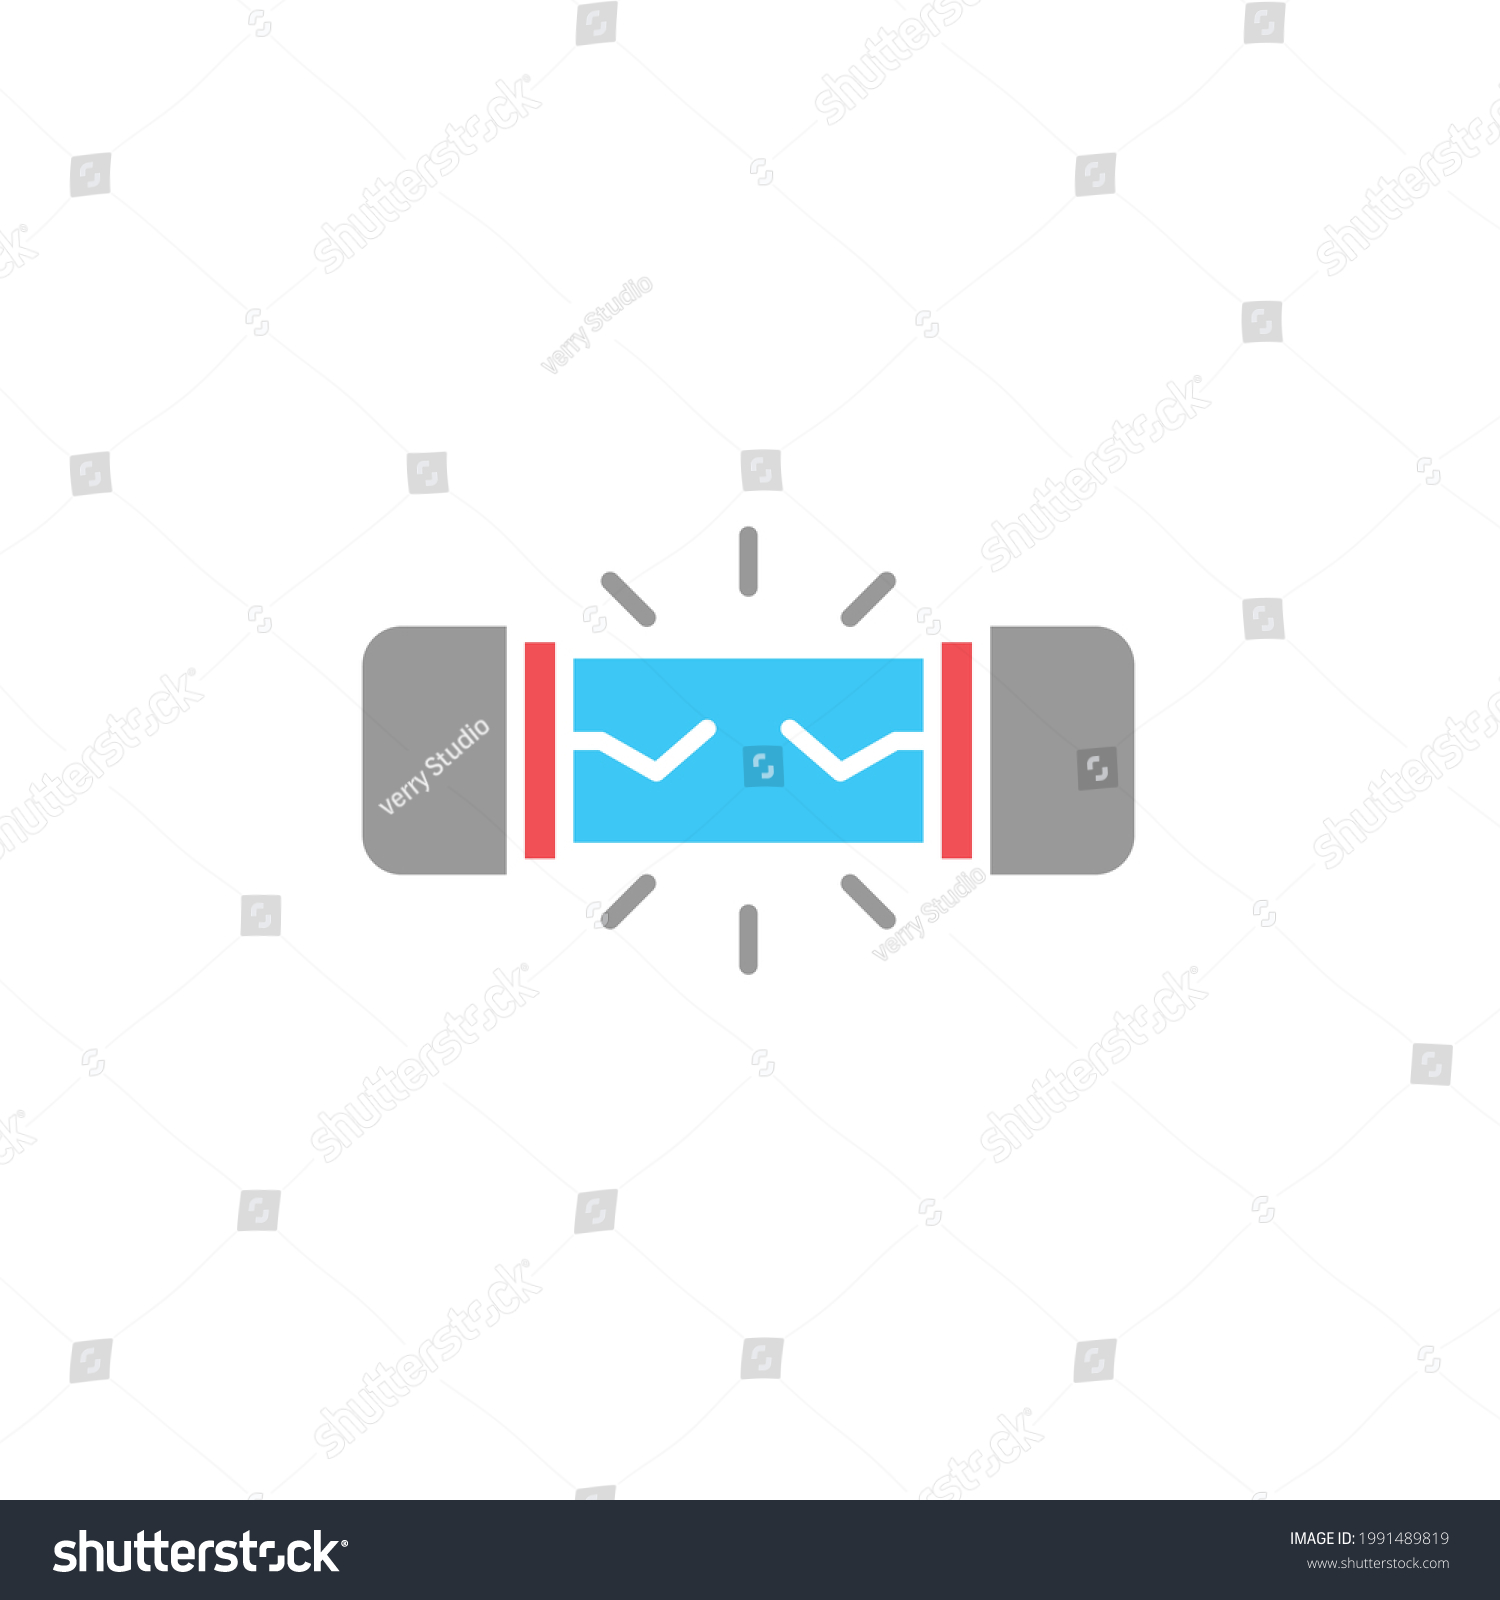 SVG of blown fuse icon, eps 10 svg